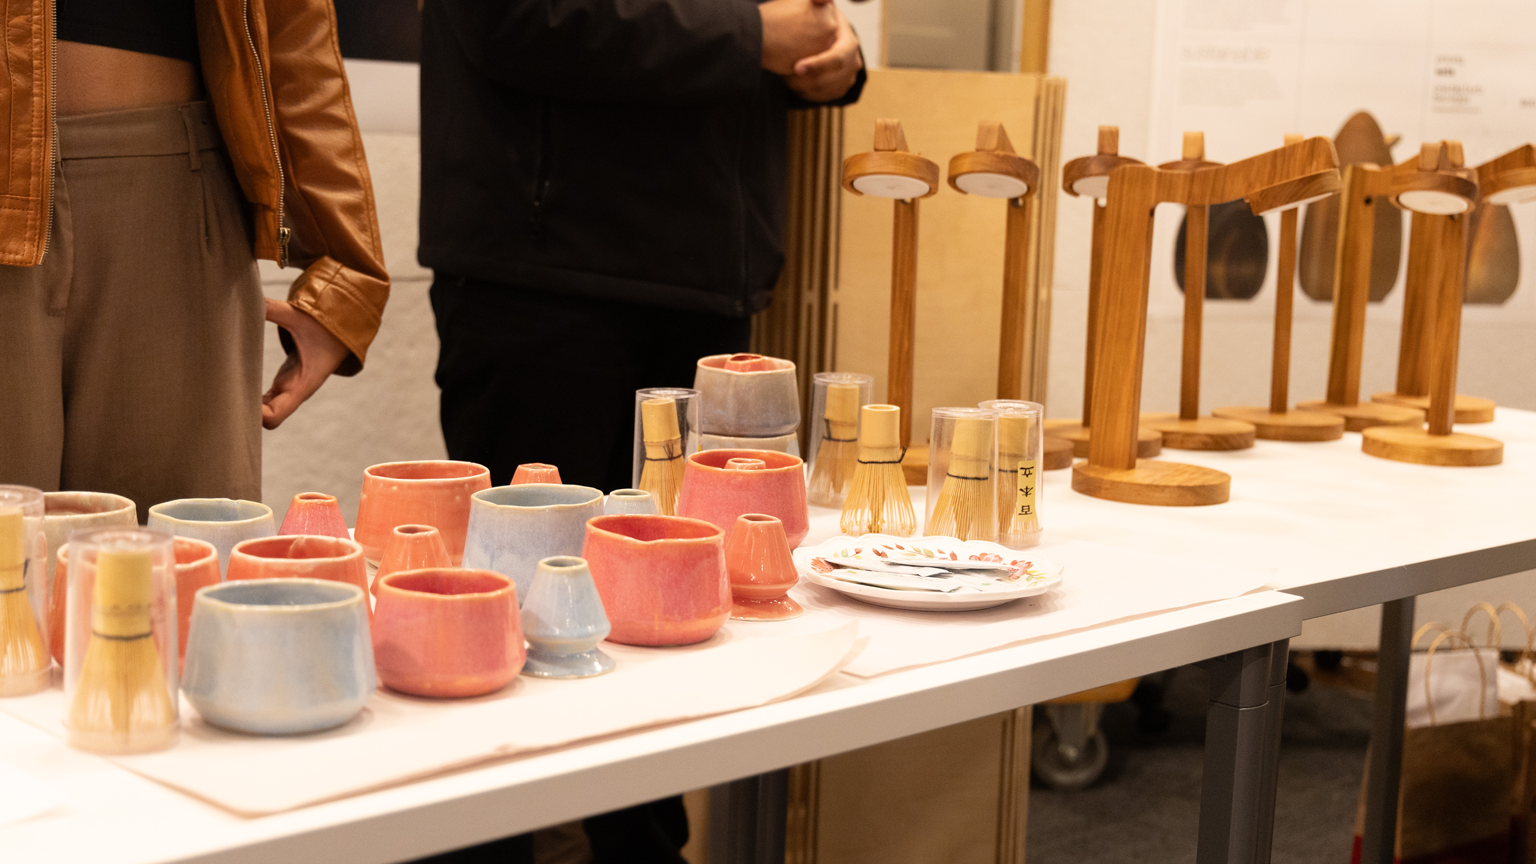 Make 10 products lined up on a table, ready for sale. The left side of the photo shows ceramic pots; the right side shows a combination headphone stand and lamp.